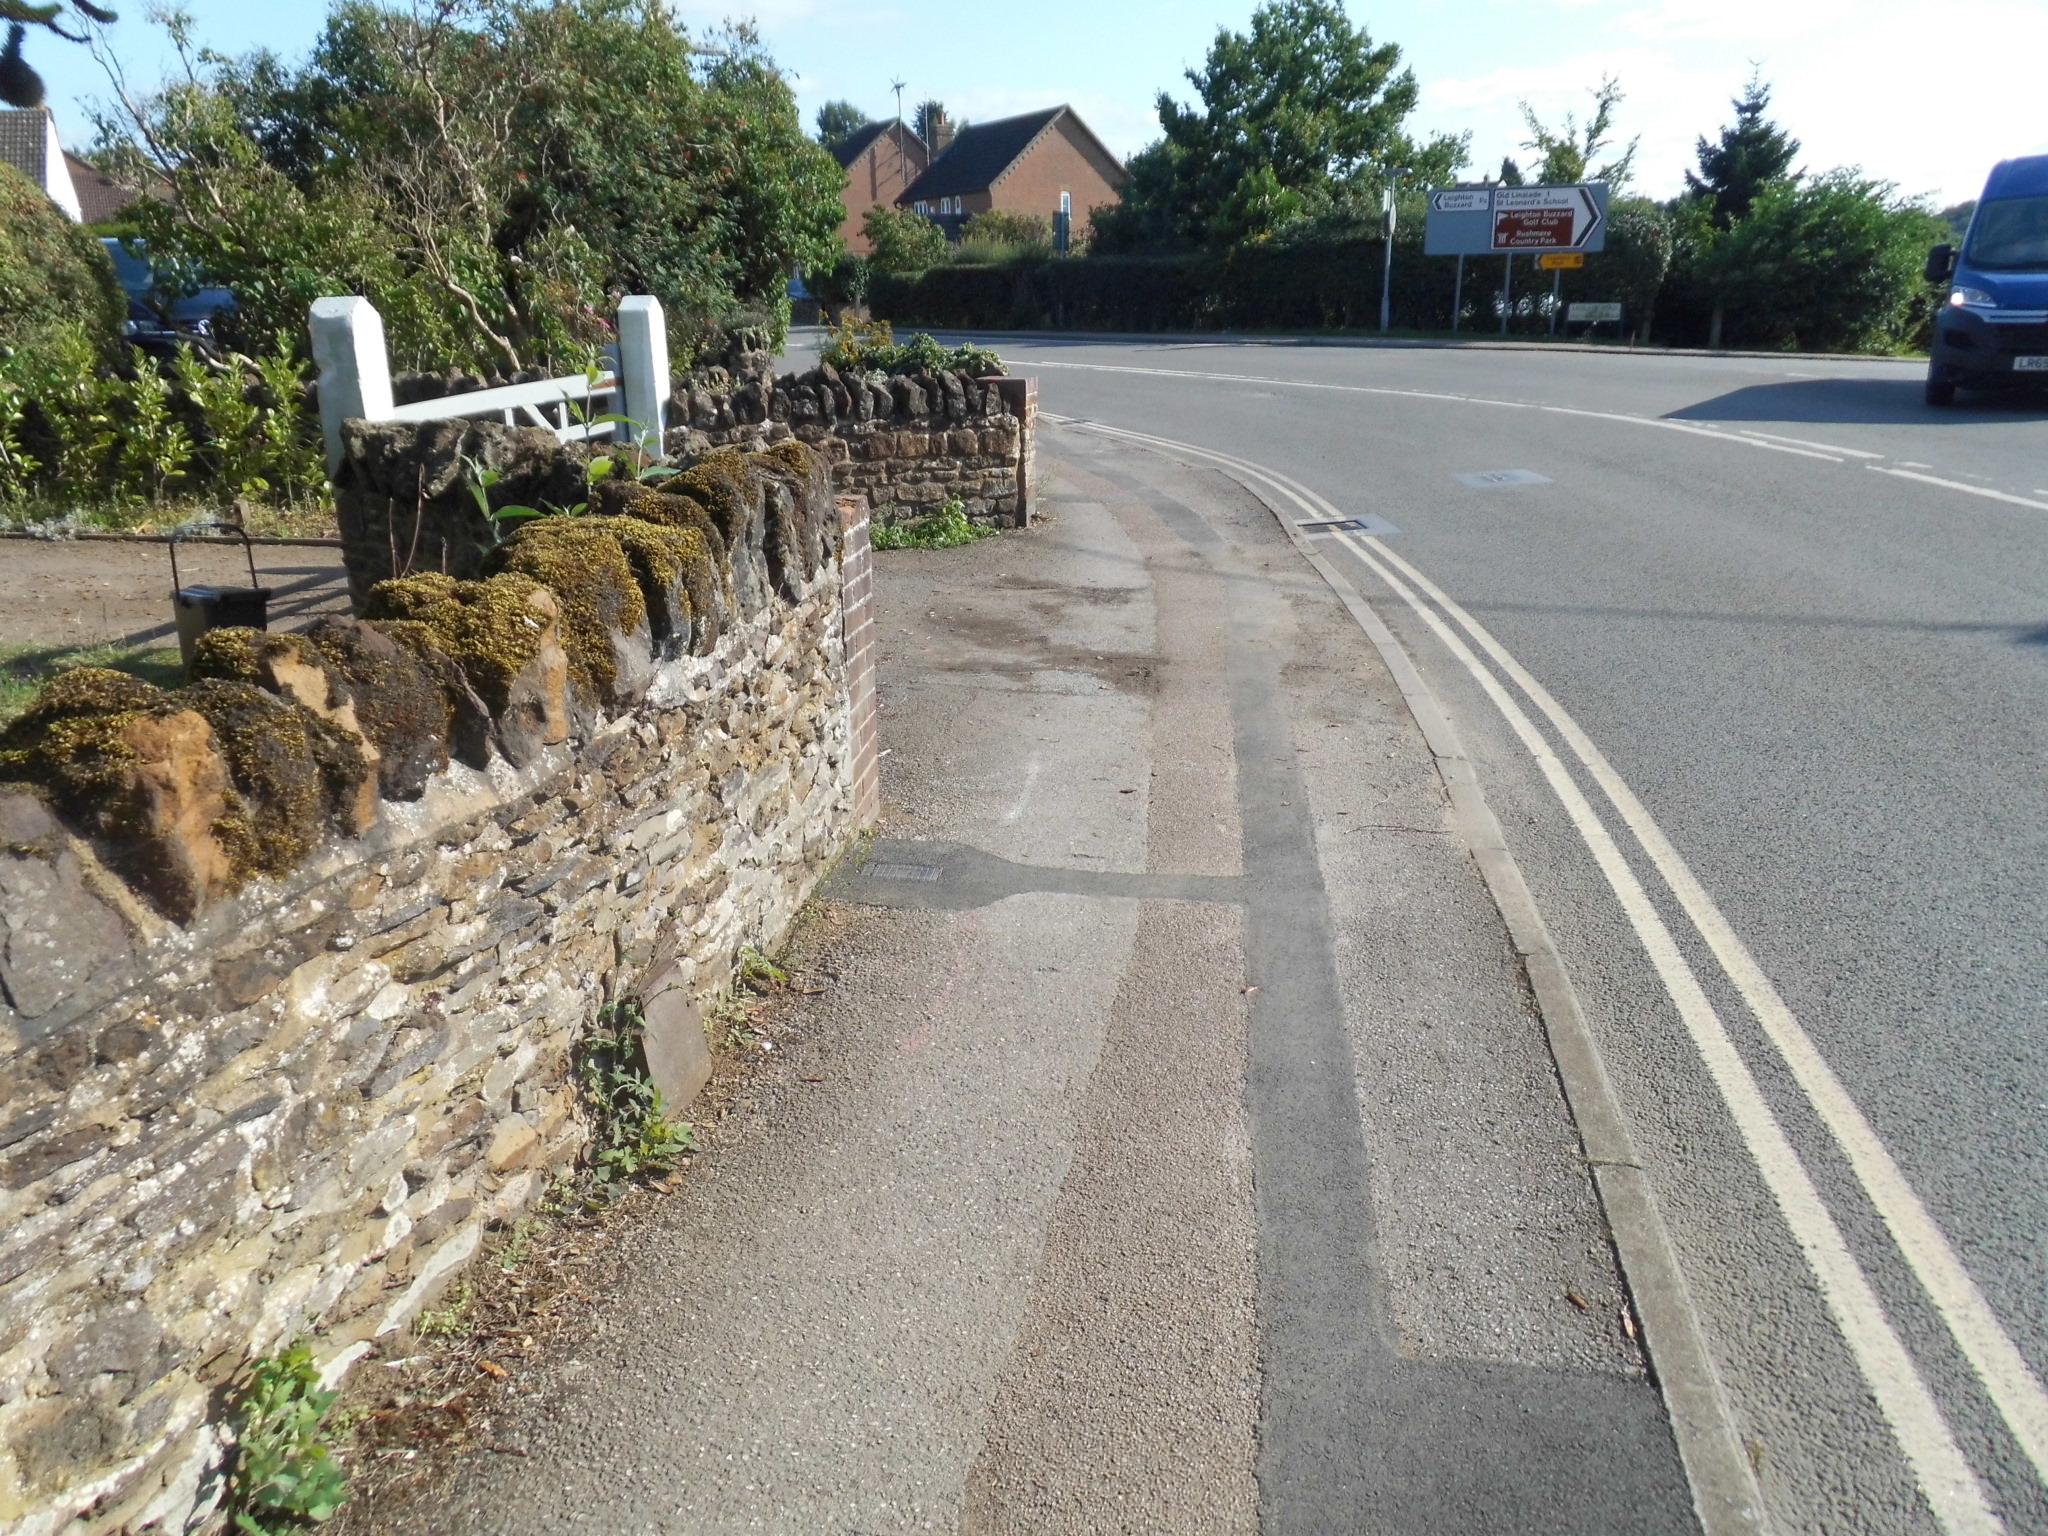 Telegraph cable marker post at 2 Woburn Road, Heath and Reach, Leighton Buzzard by Derek Pattenson 